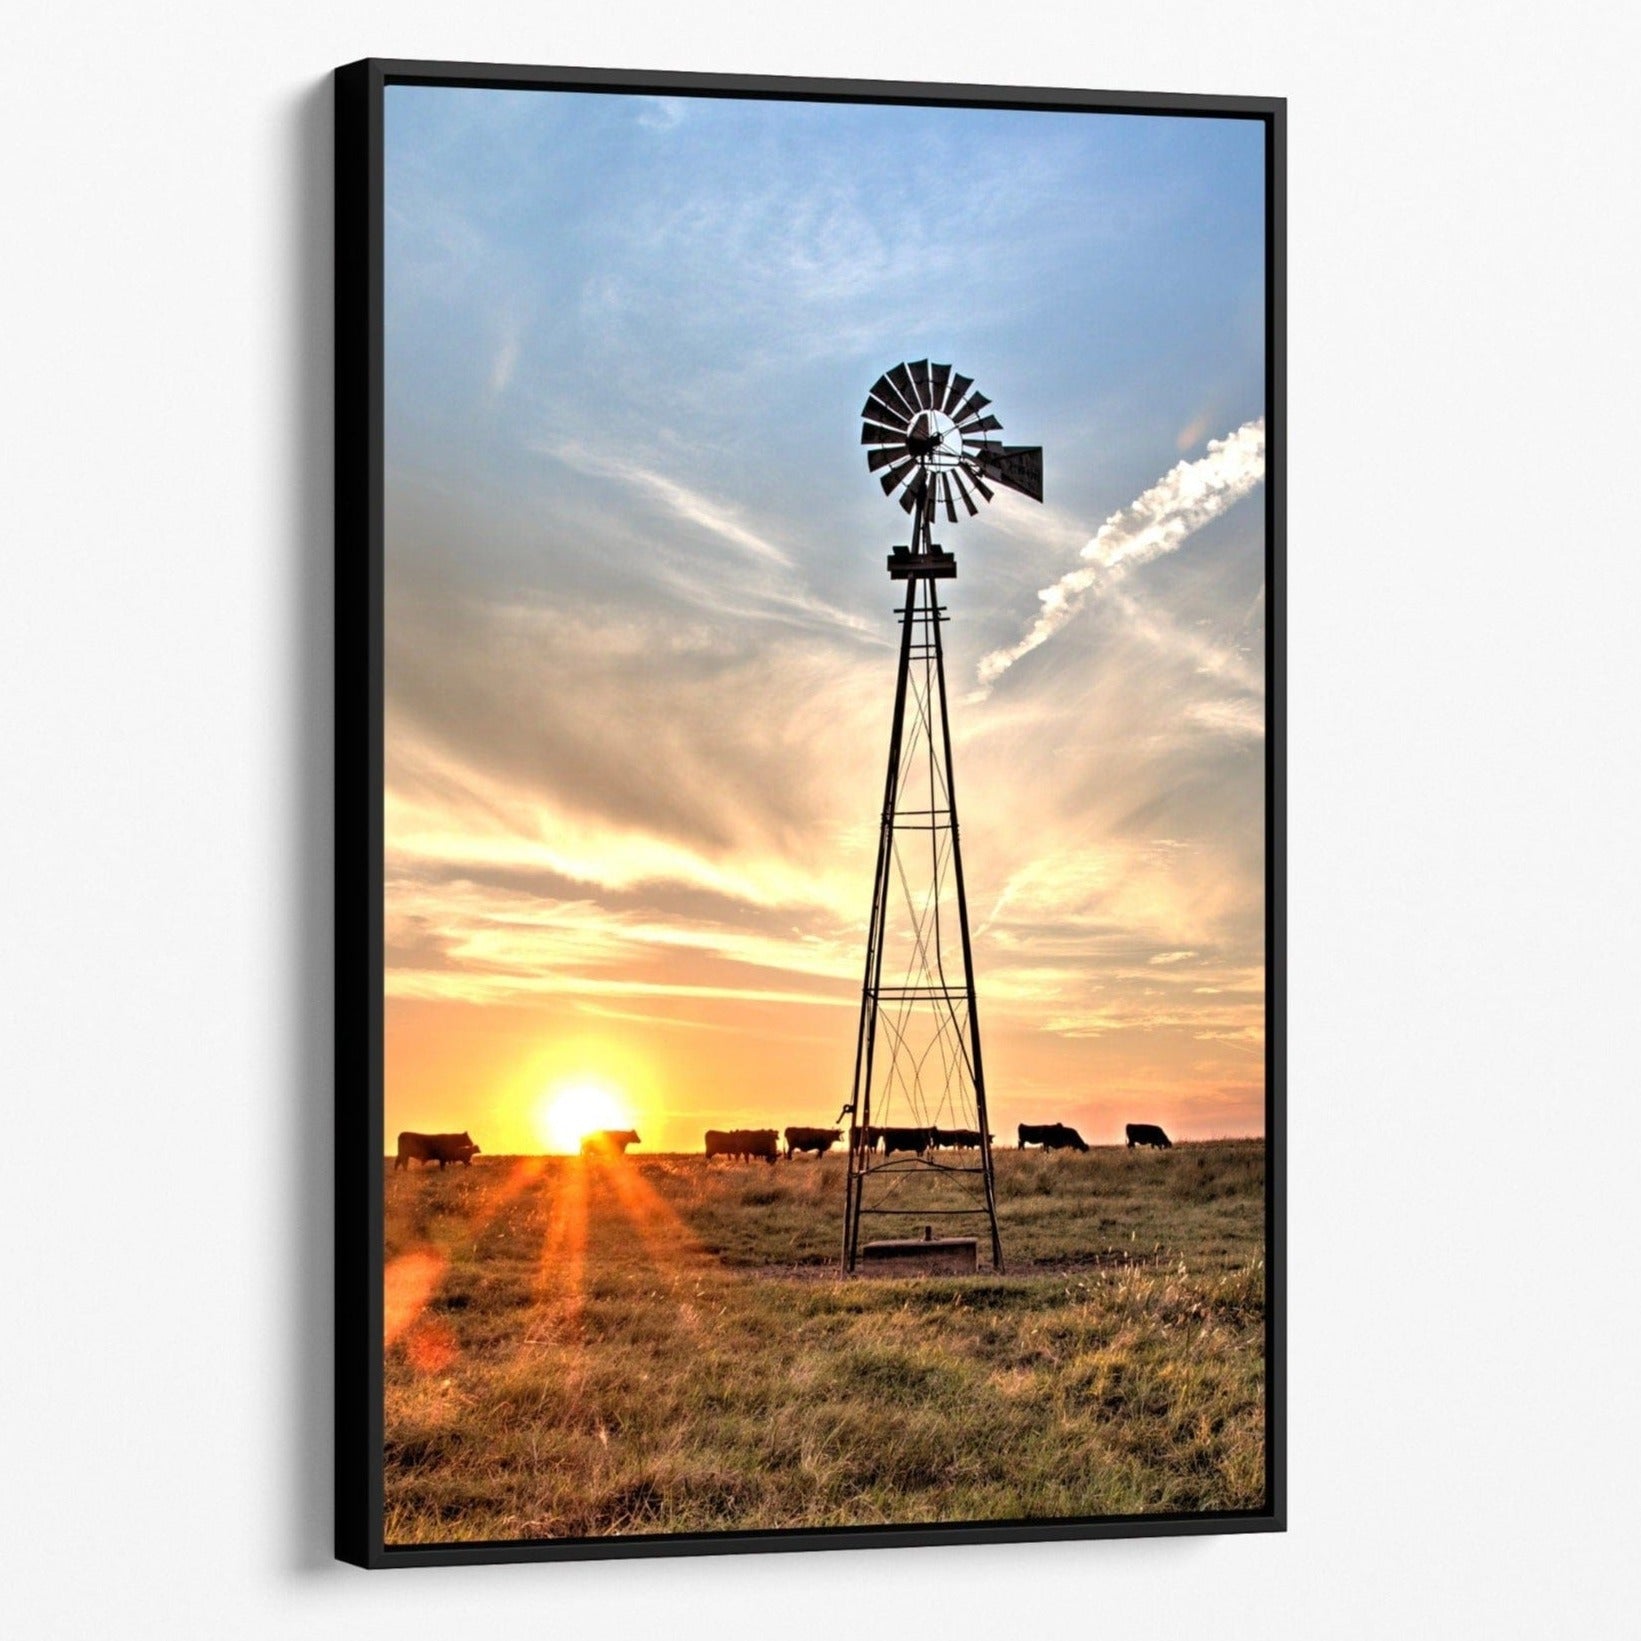 Rustic Old Windmill and Black Angus Cows Wall Art Canvas-Black Frame / 12 x 18 Inches Wall Art Teri James Photography